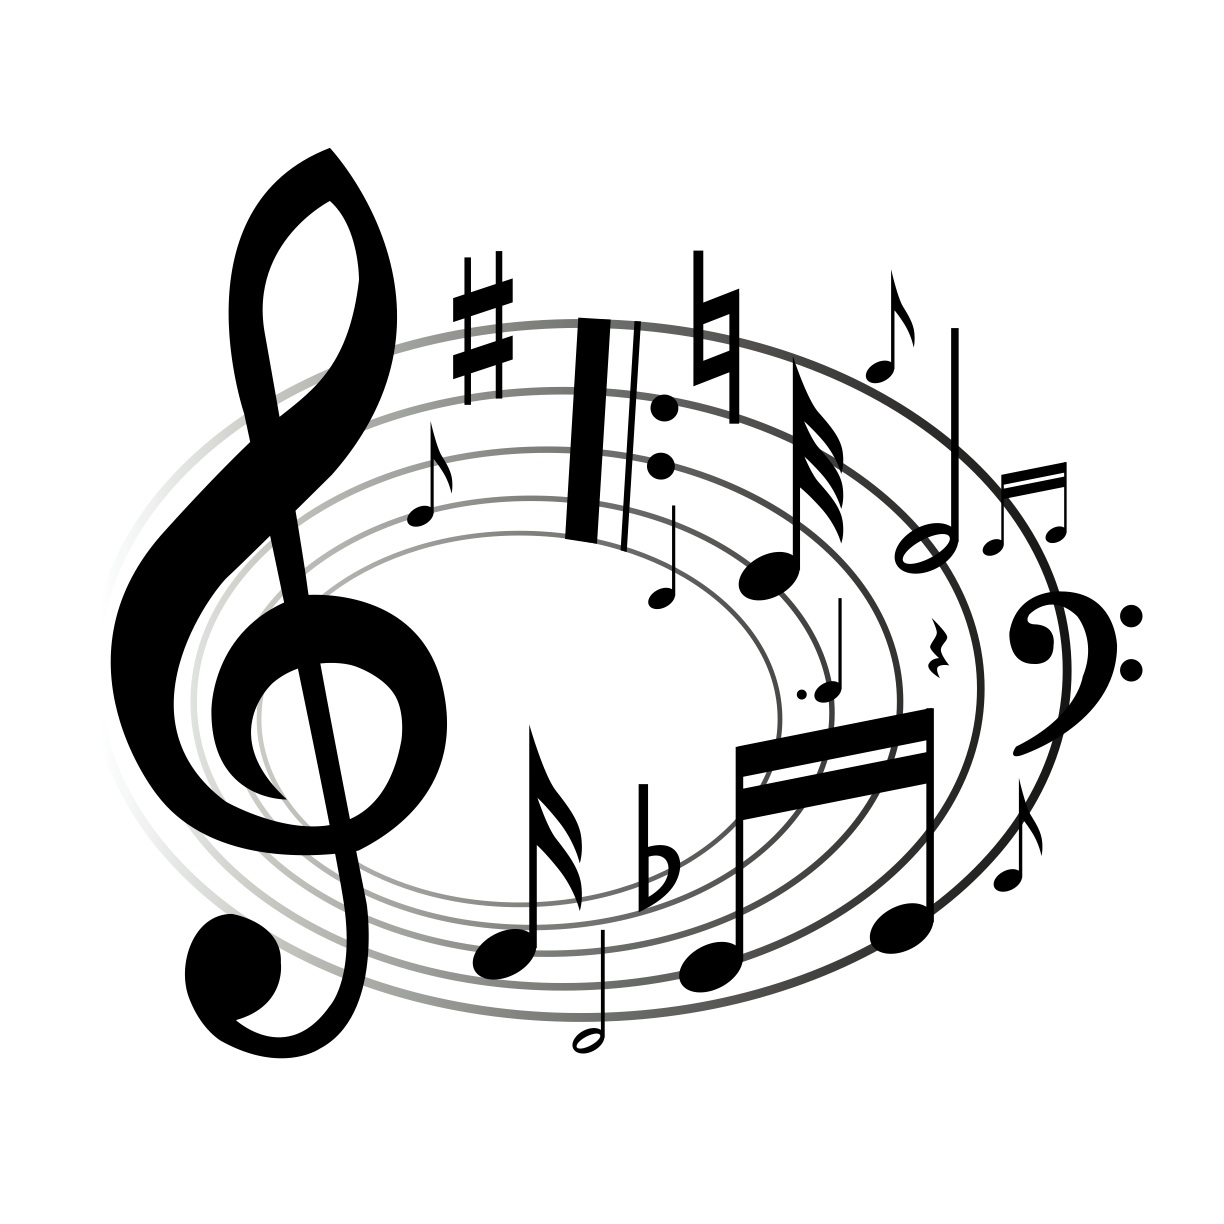 music clipart for word - photo #9